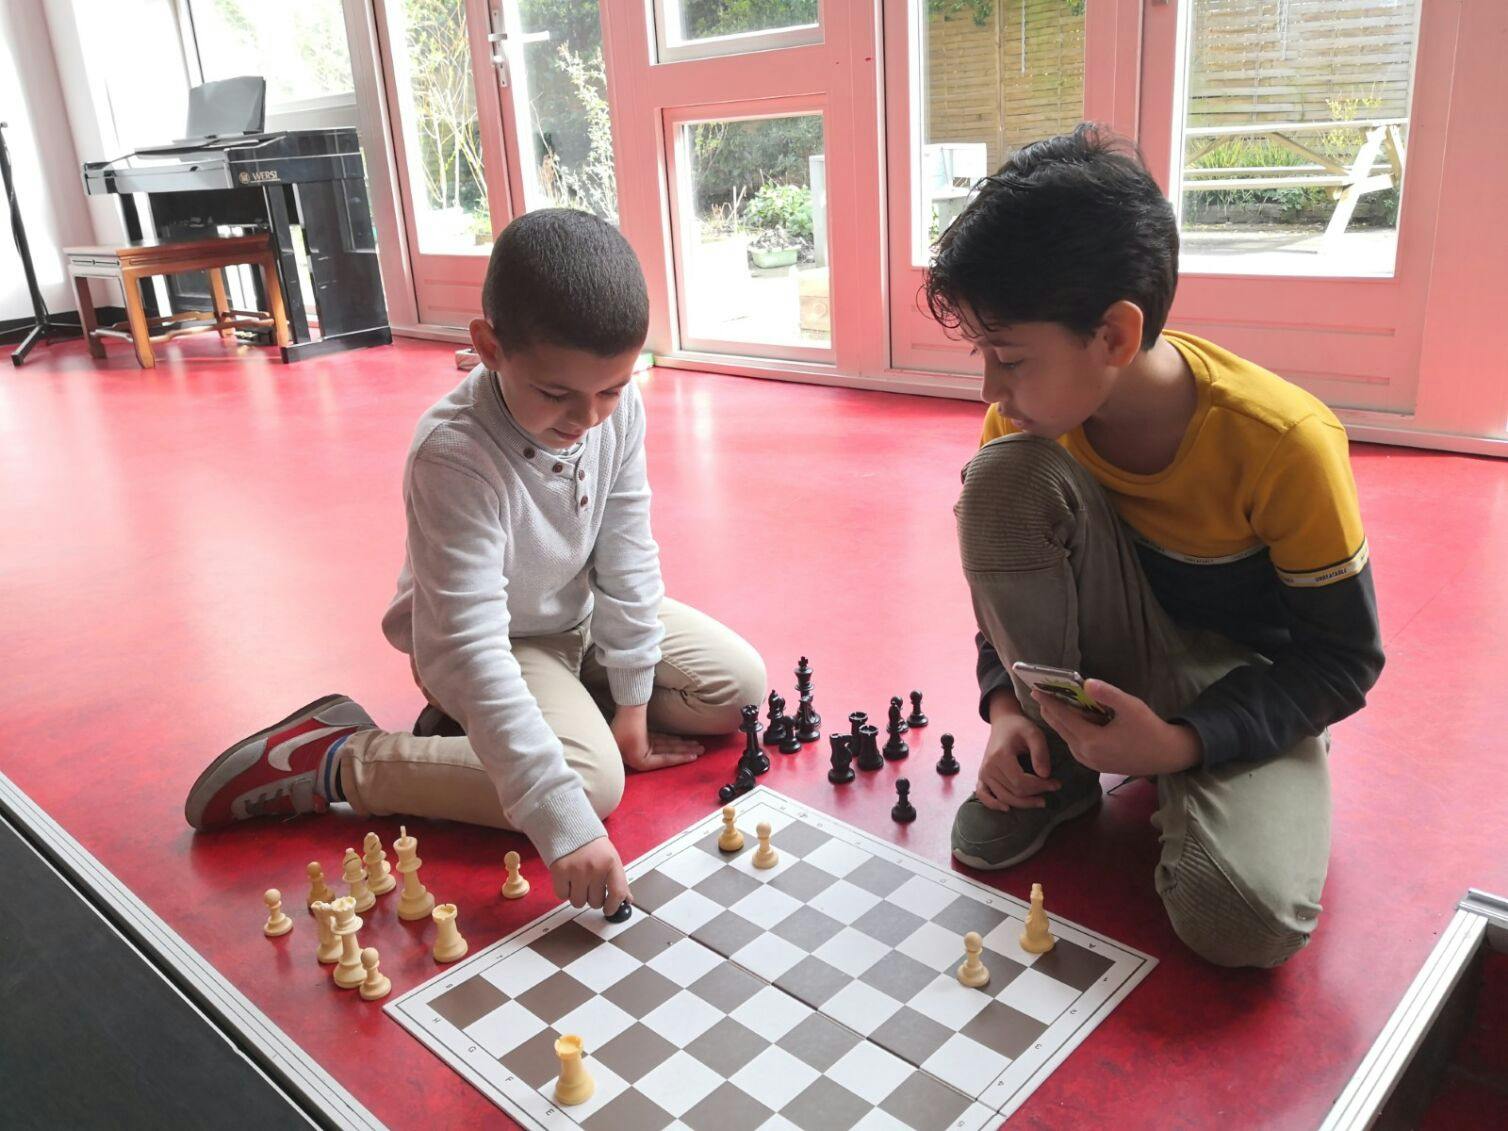 Blood-curdling chess tournament & creative evening (6-14 years)